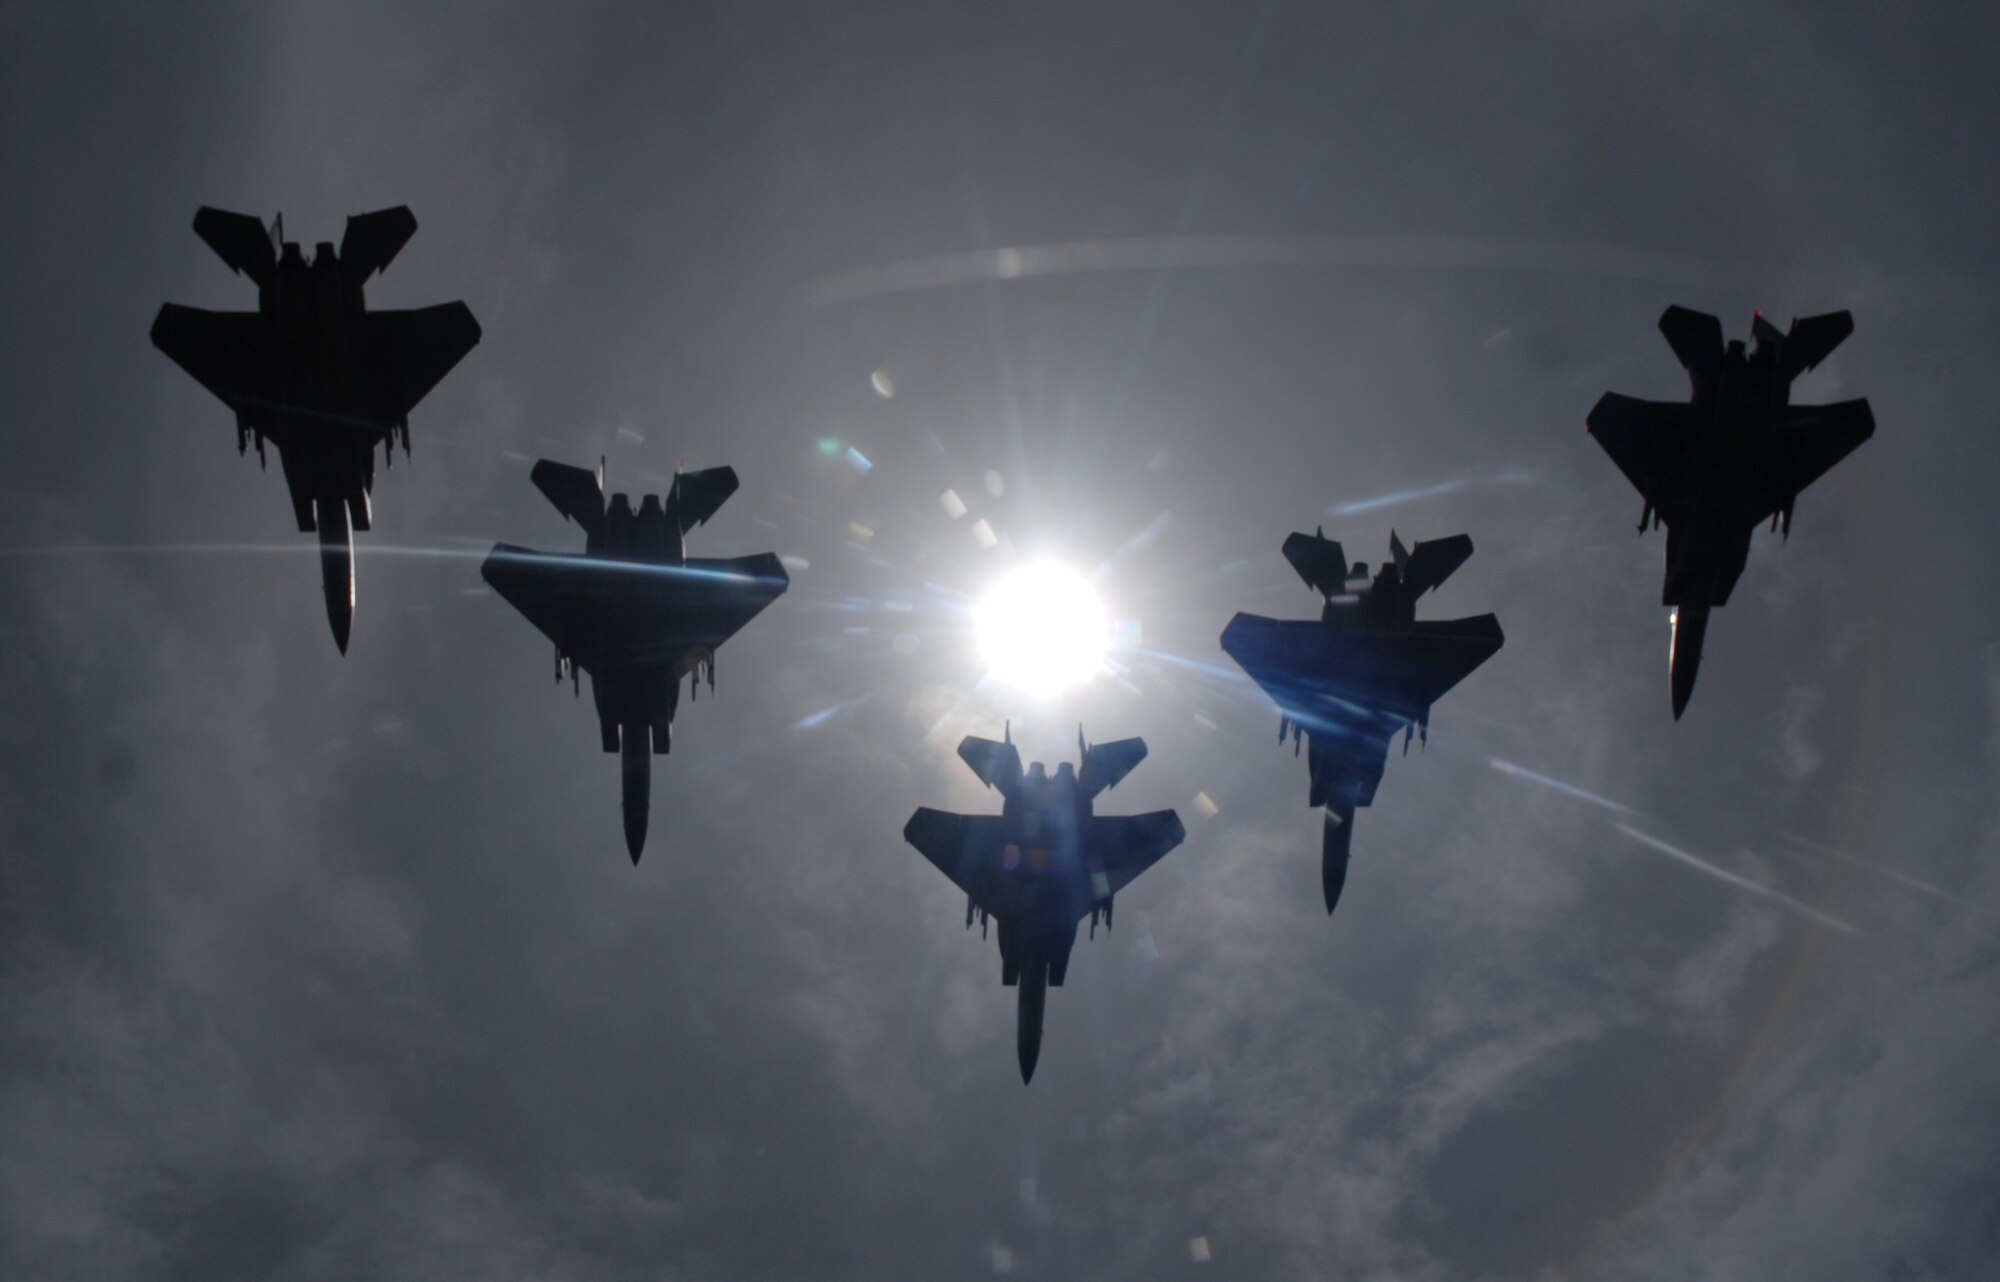 A flight of F-15C Eagles from the 44th Fighter Squadron, Kadena Air Base, flies during a total solar eclipse over the island of Okinawa, Japan July 22, 2009. The eclipse was a rare opportunity for service members stationed here to witness this unique event. (U.S. Air Force photo/Airman 1st Class Chad Warren)